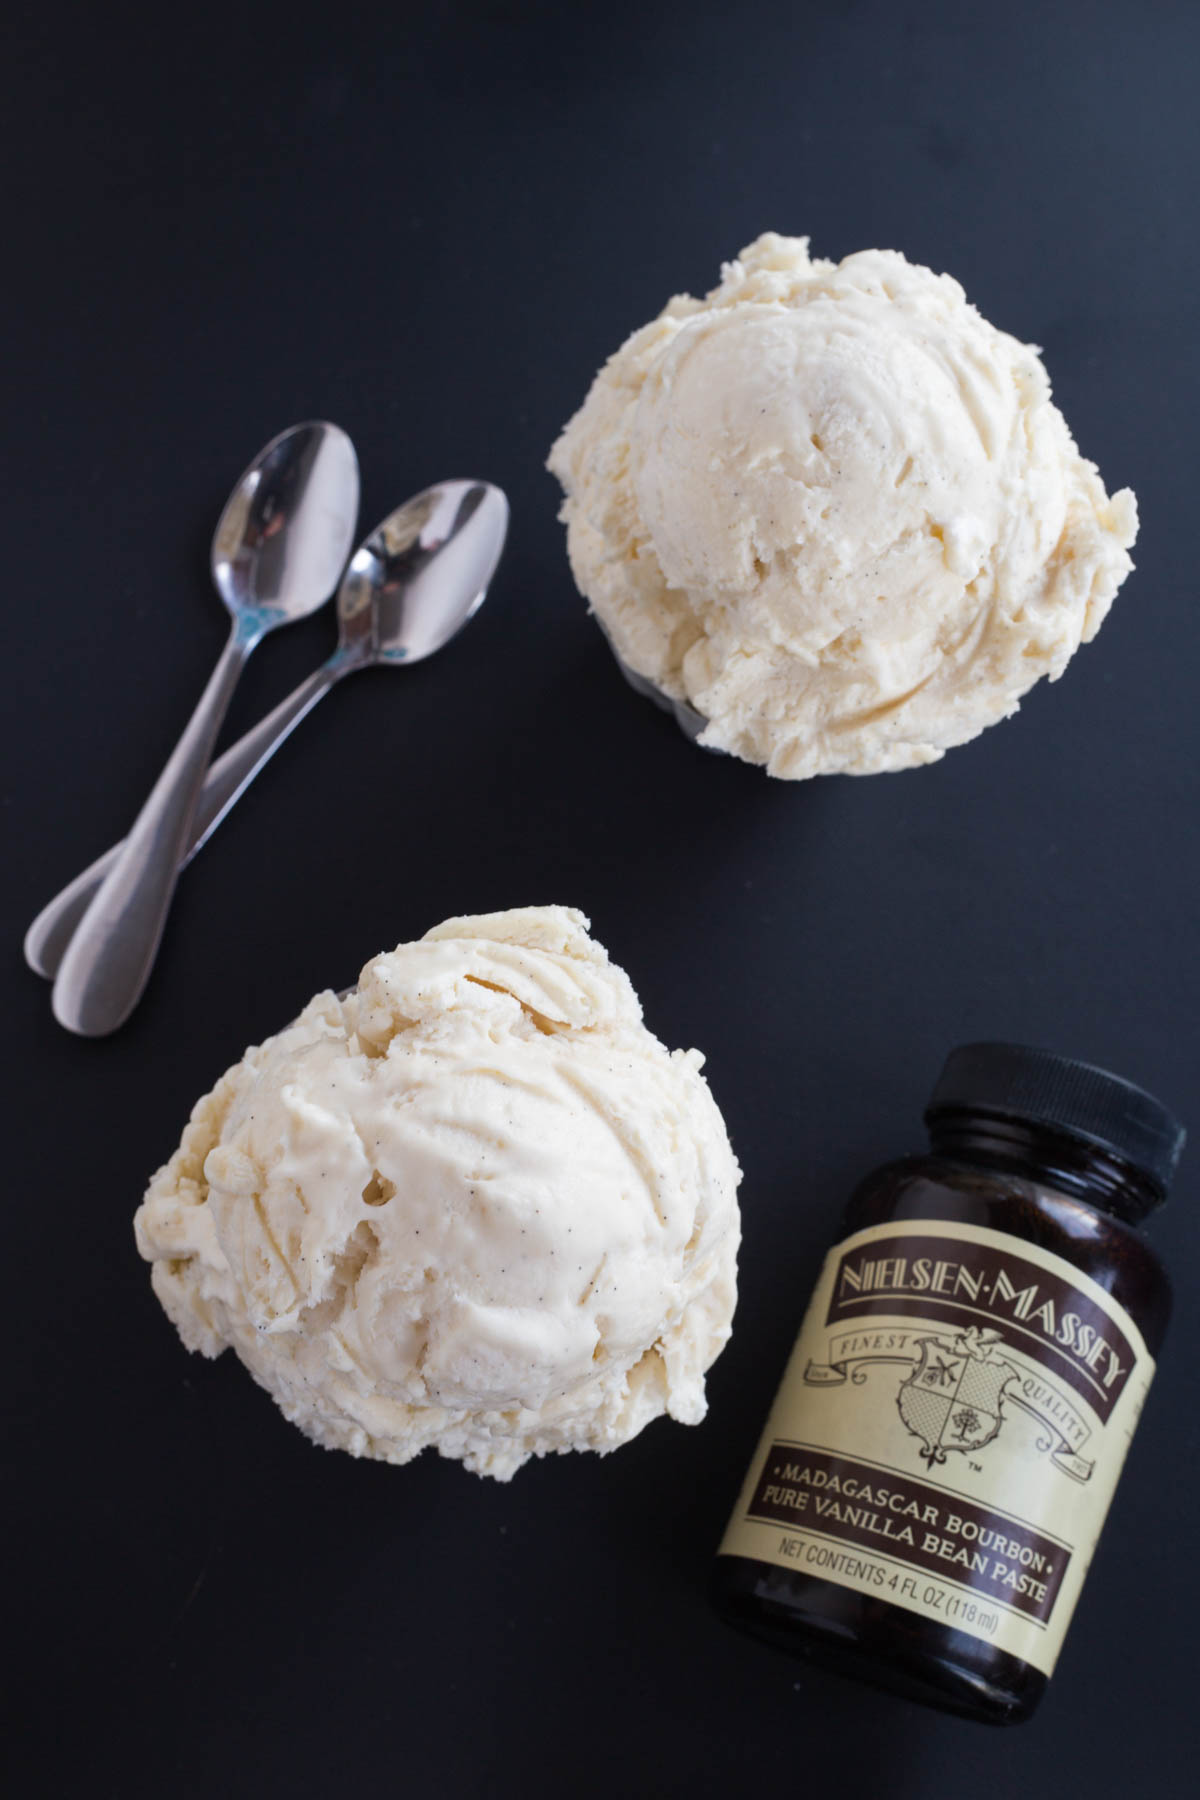 Looking down at two dishes of Vanilla Bean Cheesecake Ice Cream with a bottle of Nielsen-Massey Vanilla Bean Paste